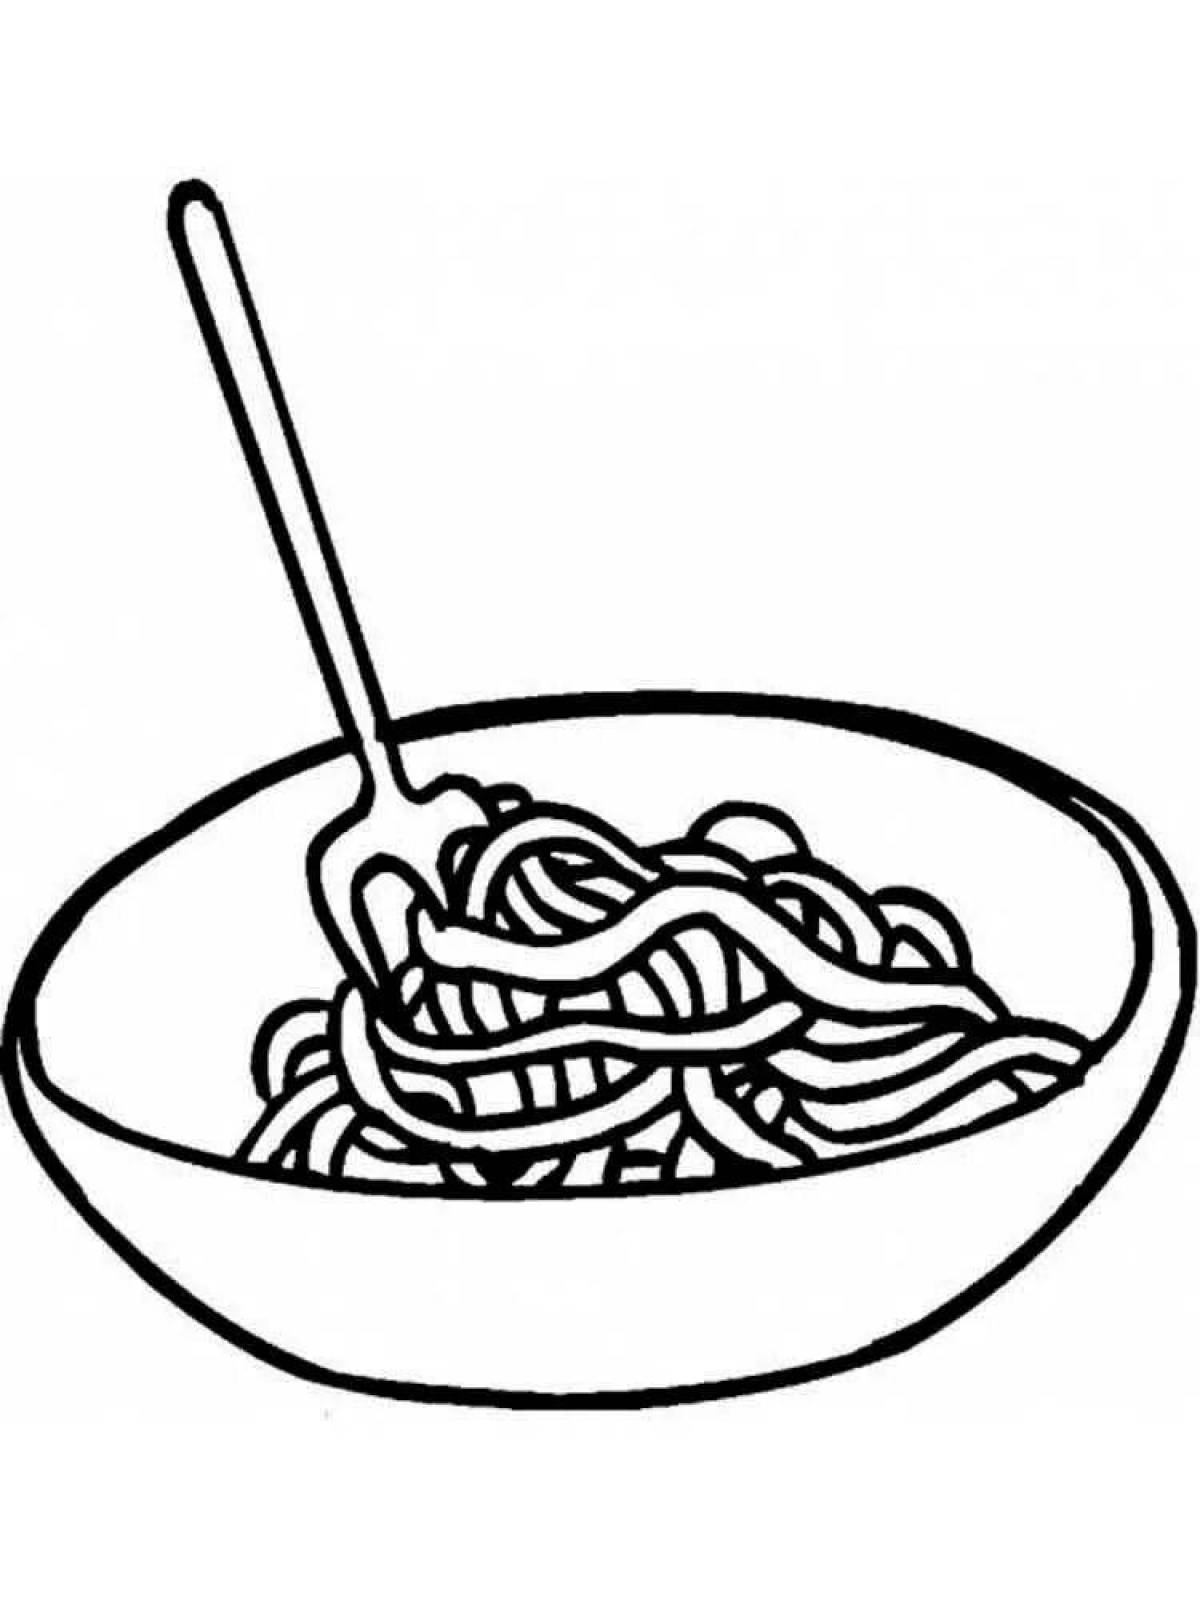 Outstanding pasta coloring page